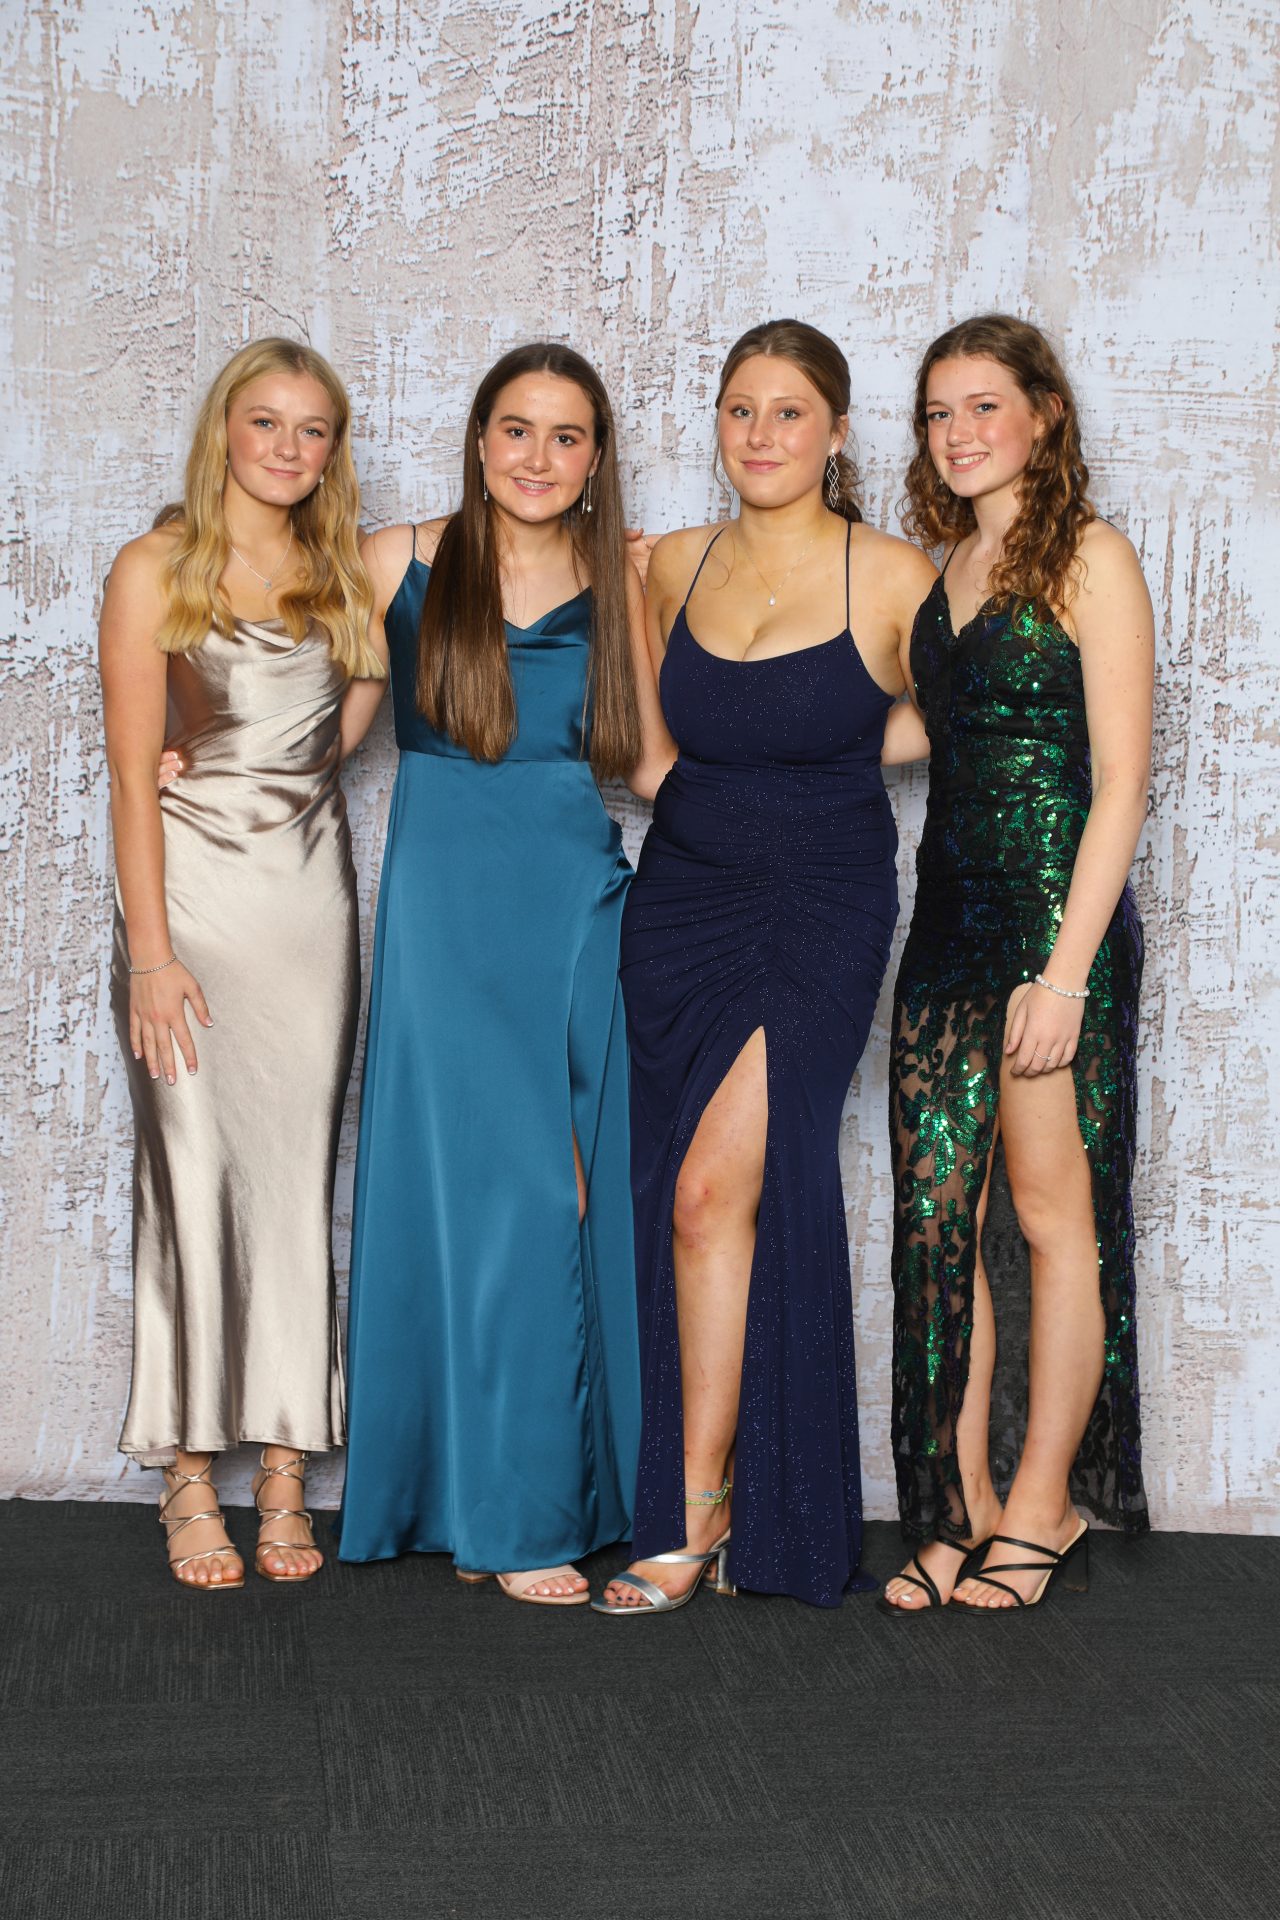 Year 10 Welcome to Senior Studies Dinner - St Mary's College